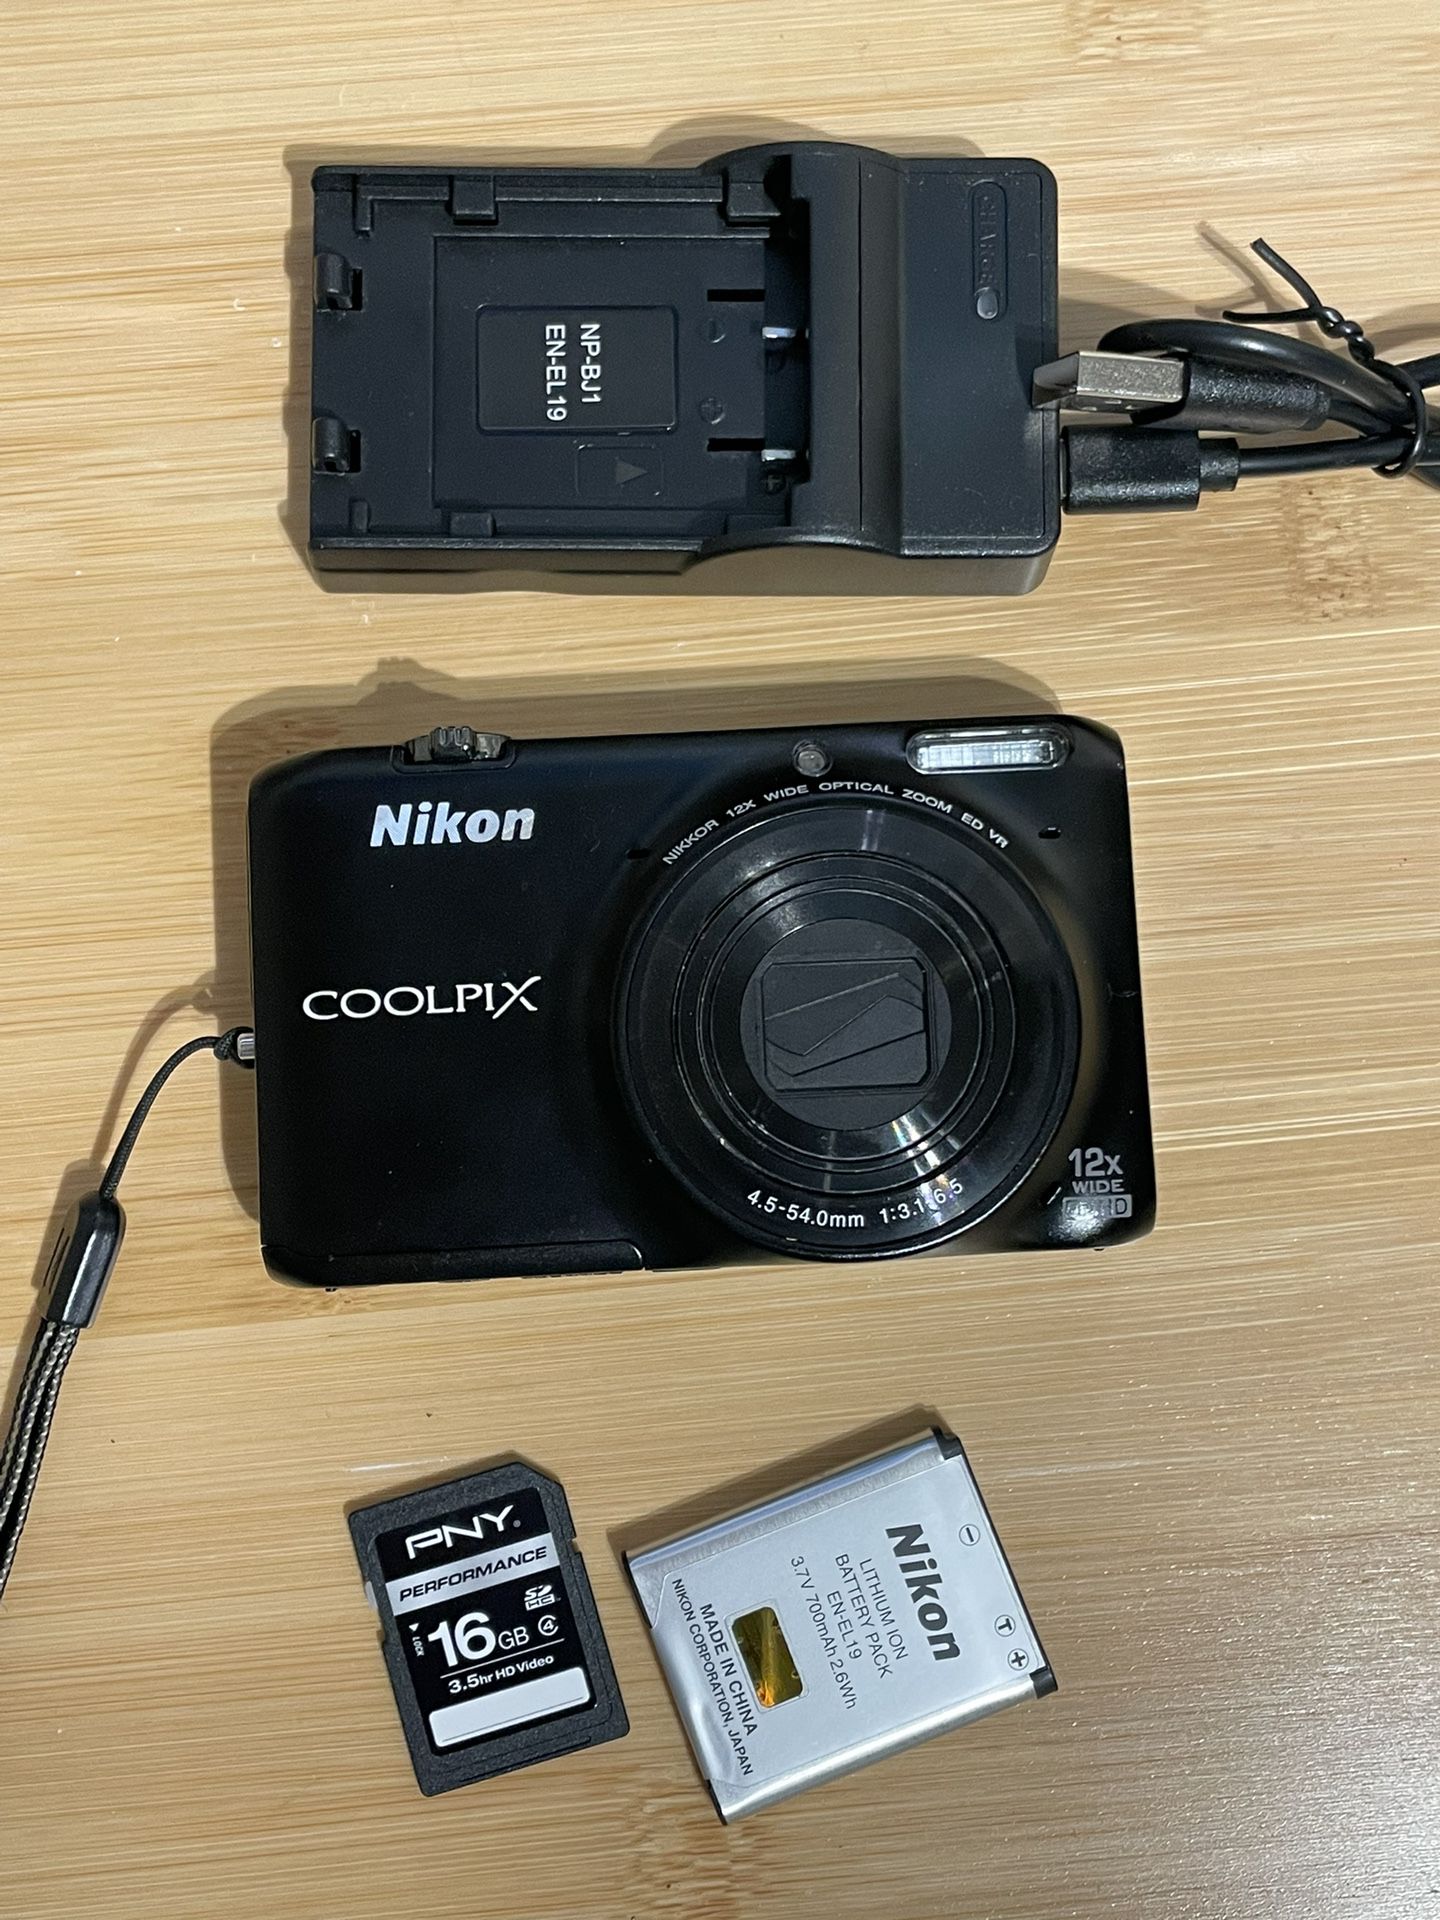 Nikon Coolpix S6500 Black Digital Camera Tested Works  Flash zoom video shutter all worker. Battery, memory card and charger is included.